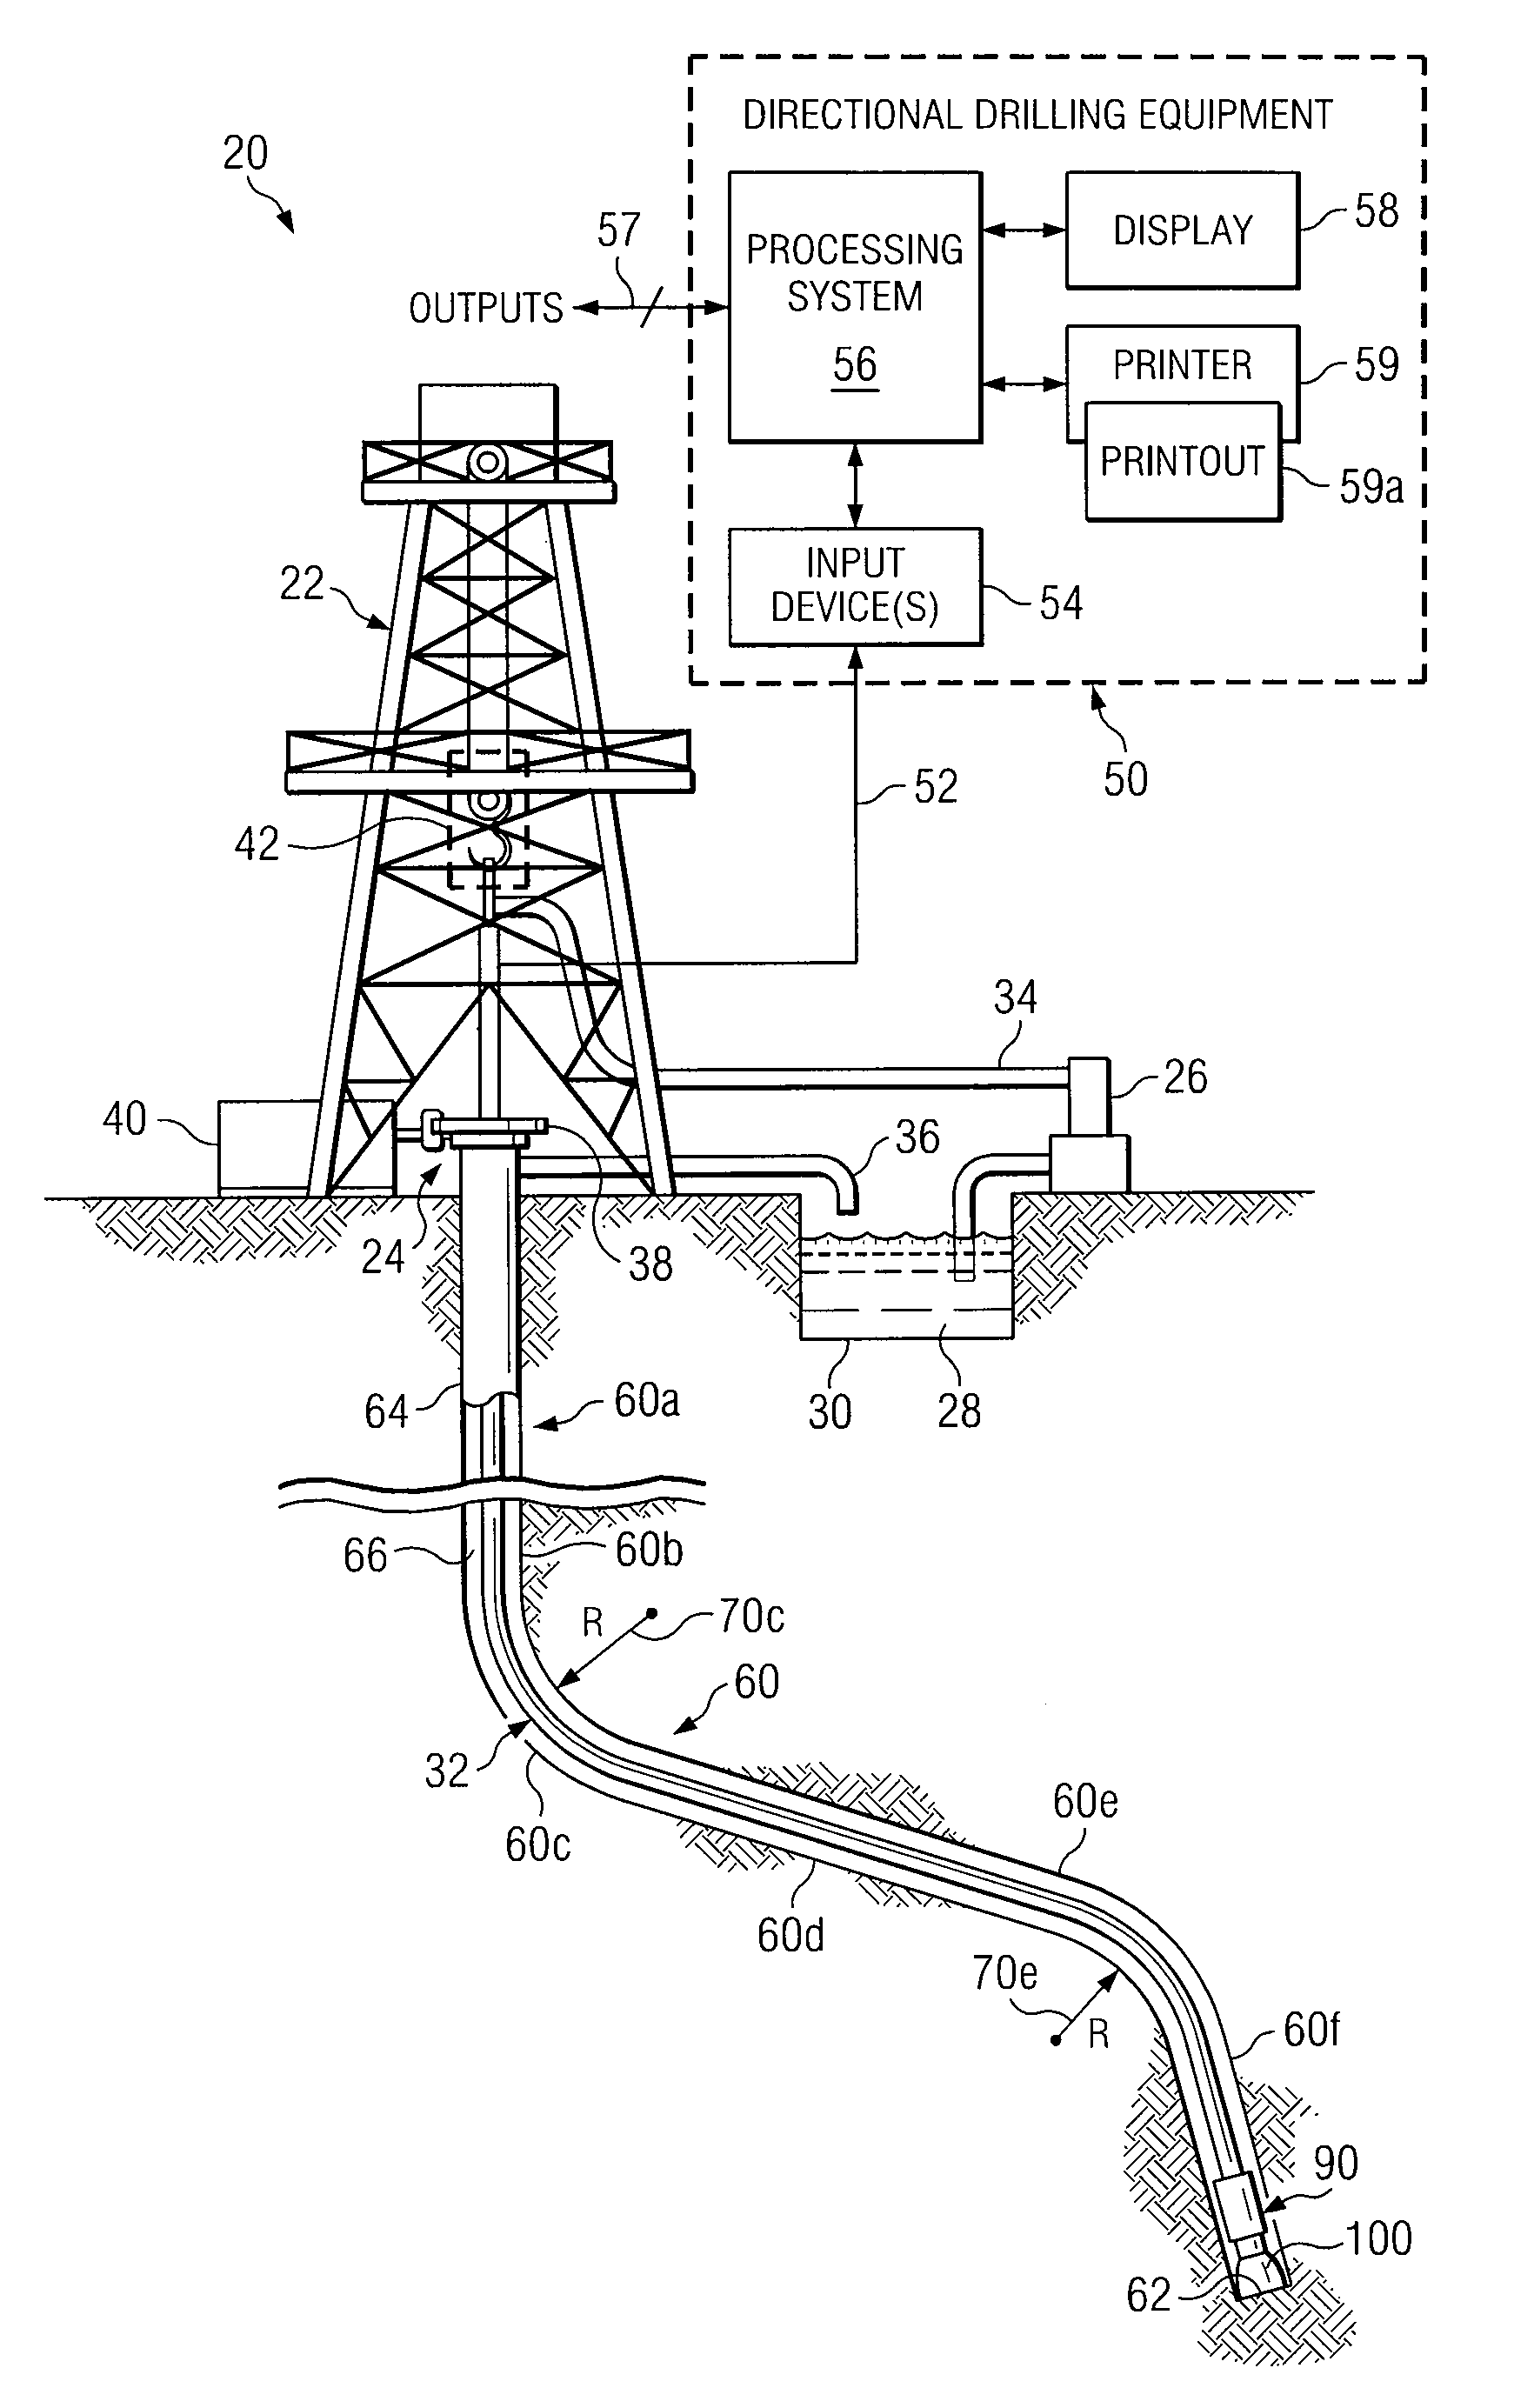 Methods and Systems to Predict Rotary Drill Bit Walk and to Design Rotary Drill Bits and Other Downhole Tools